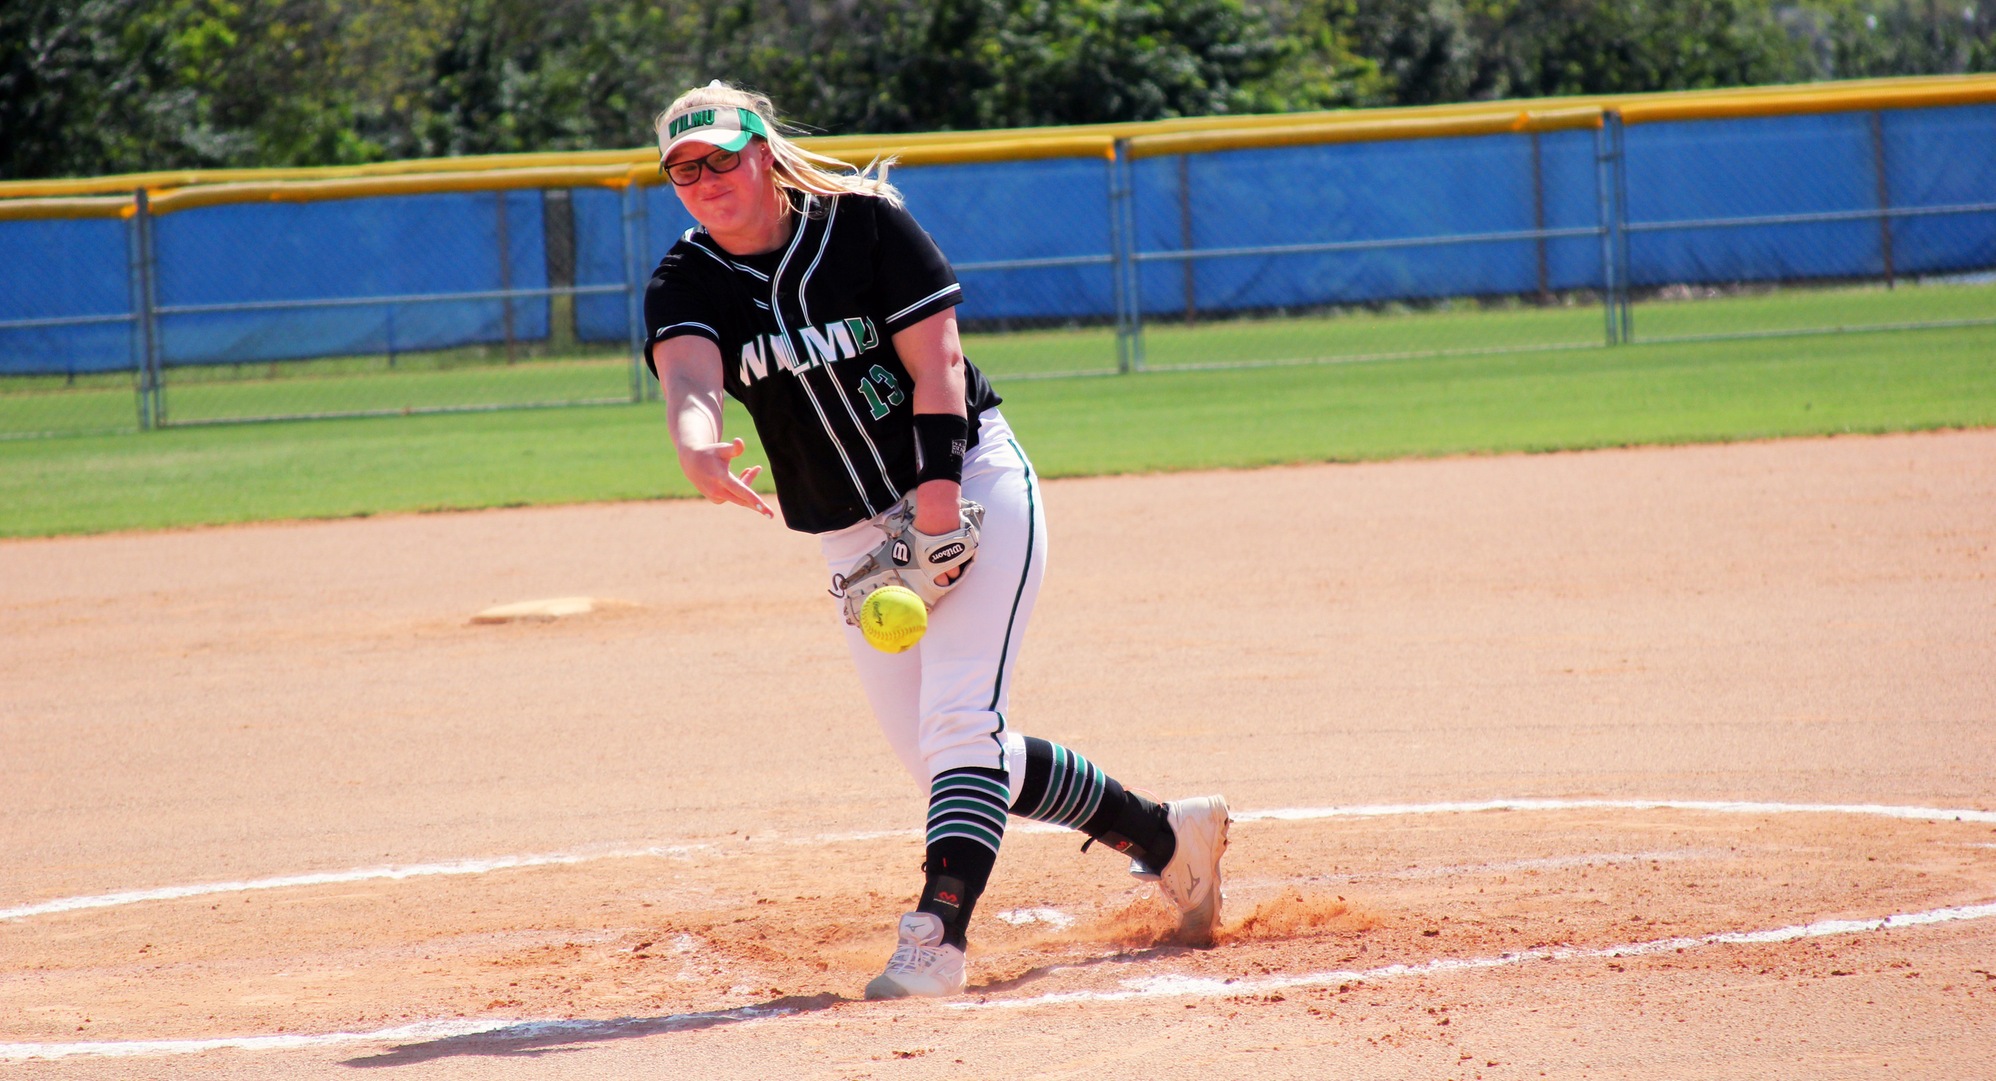 Copyright 2019; Wilmington University. All rights reserved. Photo of Makayla McCarthy who who a complete game shutout against Wheeling Jesuit. Photo by Erin Harvey. March 7, 2019 vs. Wheeling Jesuit at Kissimmee, Florida.